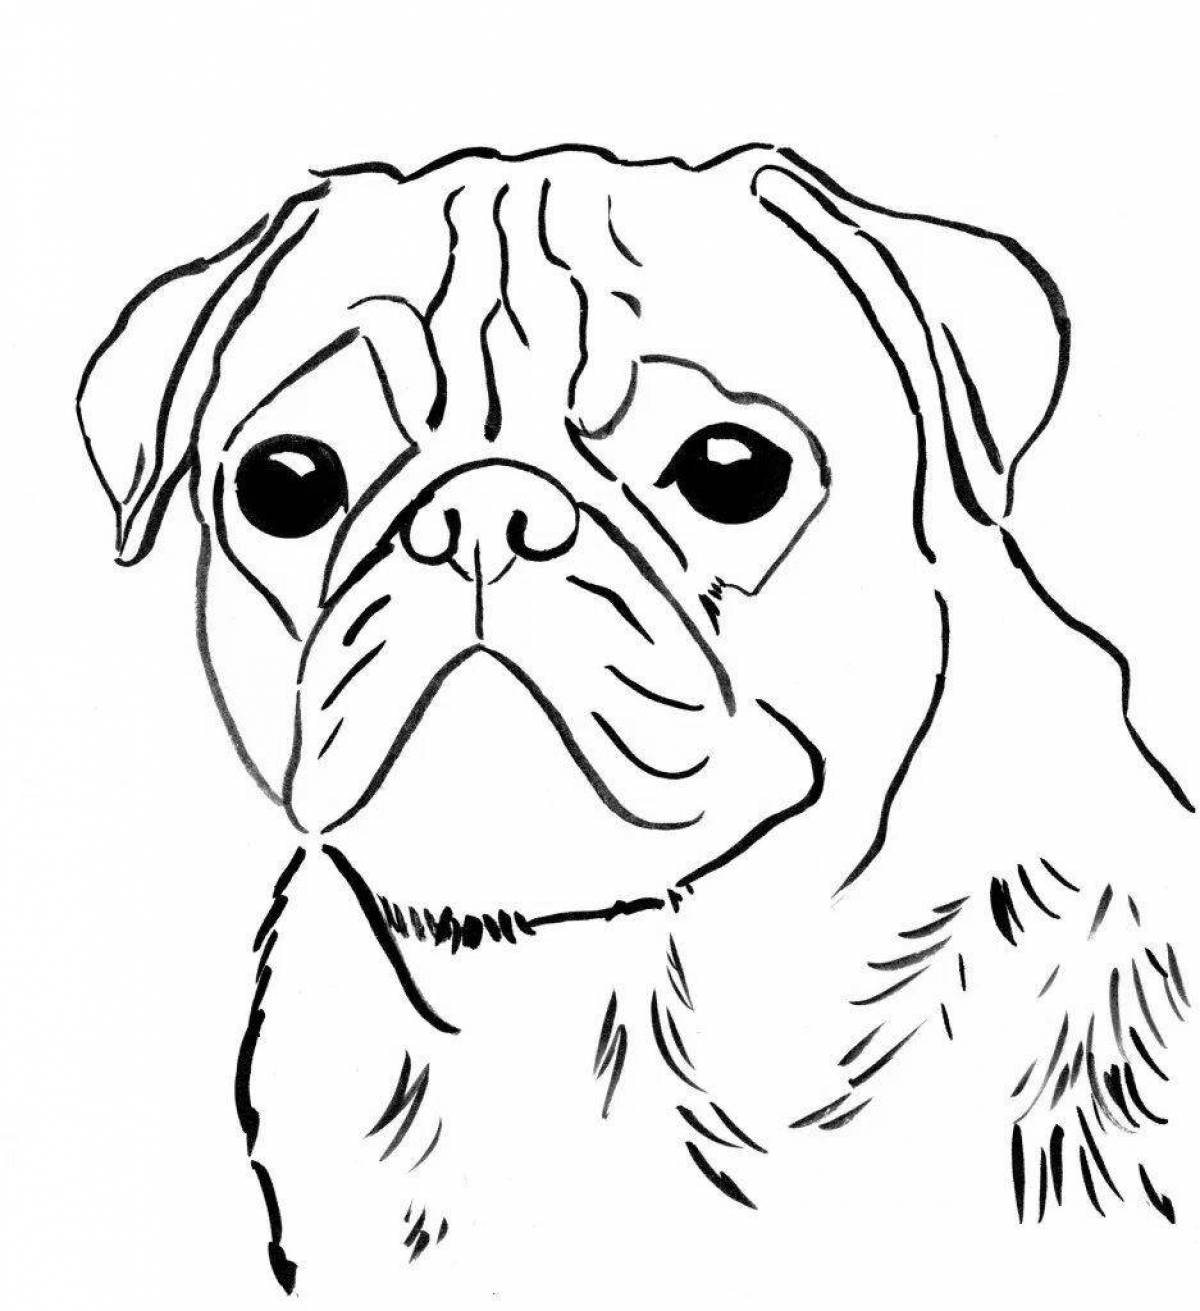 Coloring page of a sociable pug